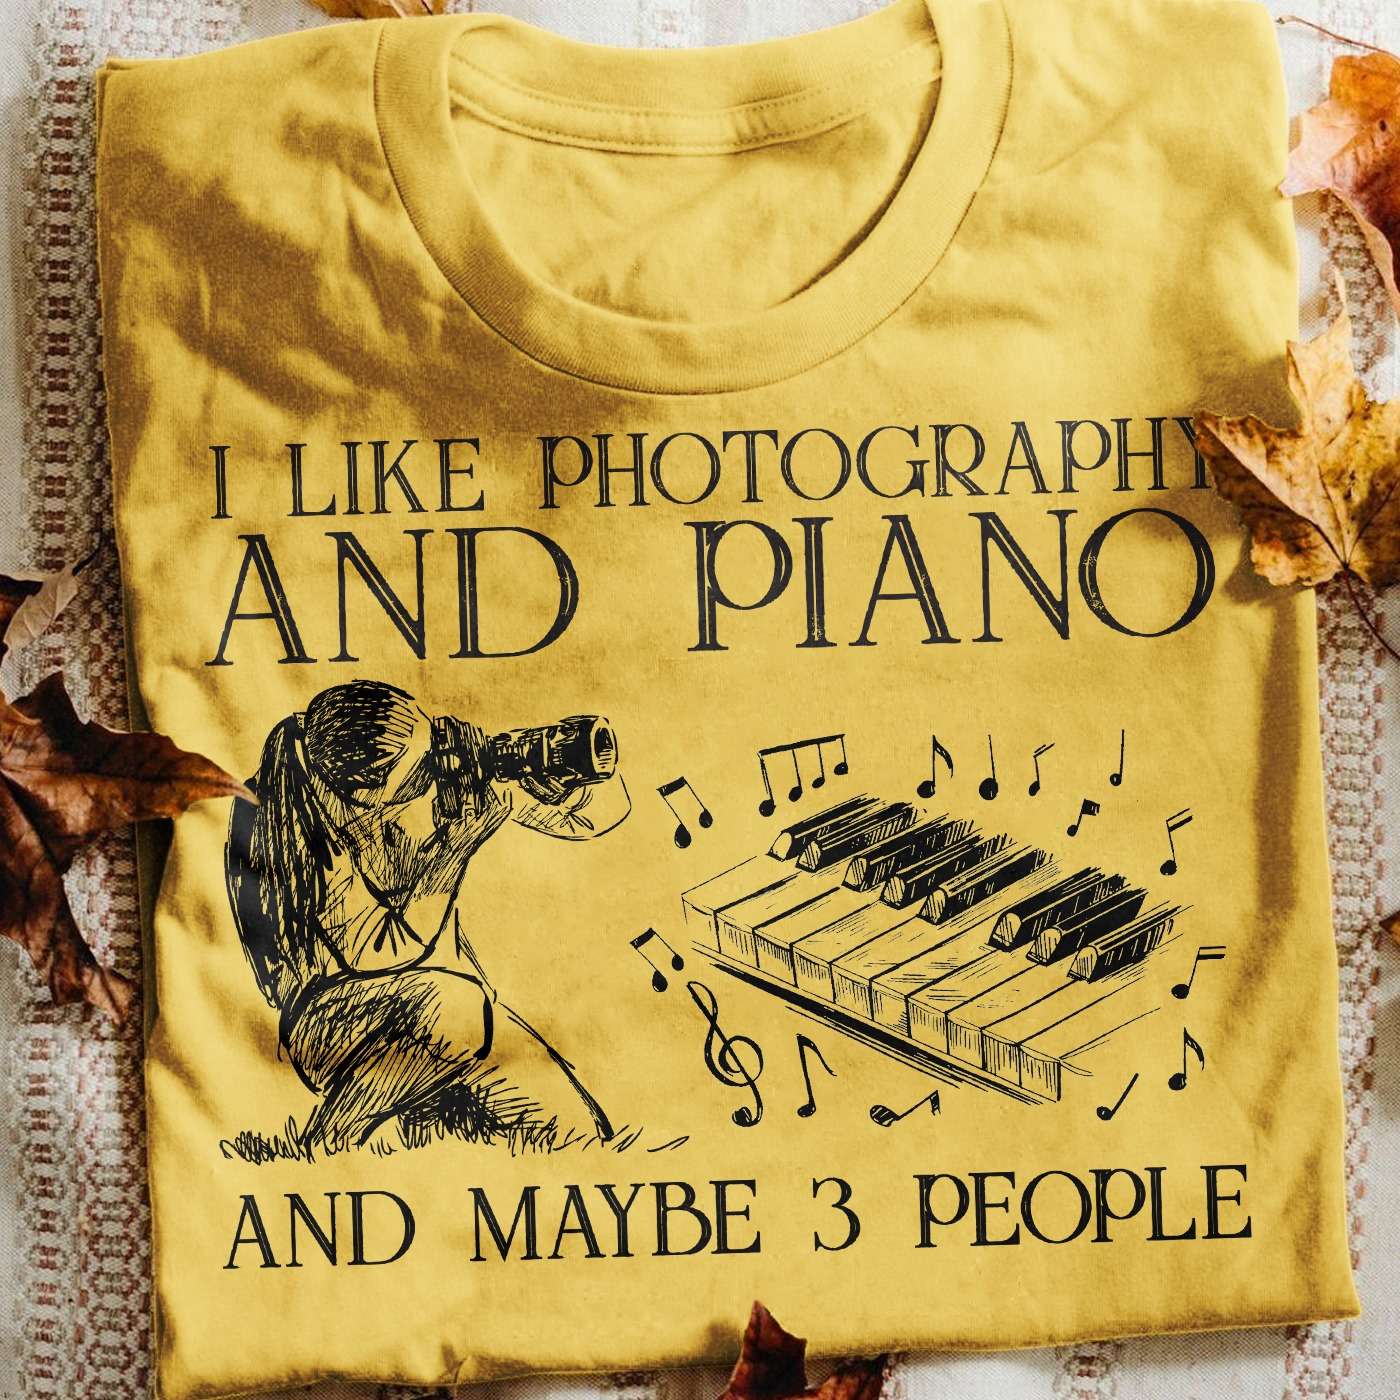 I like photography and piano and maybe 3 people - Woman photographer